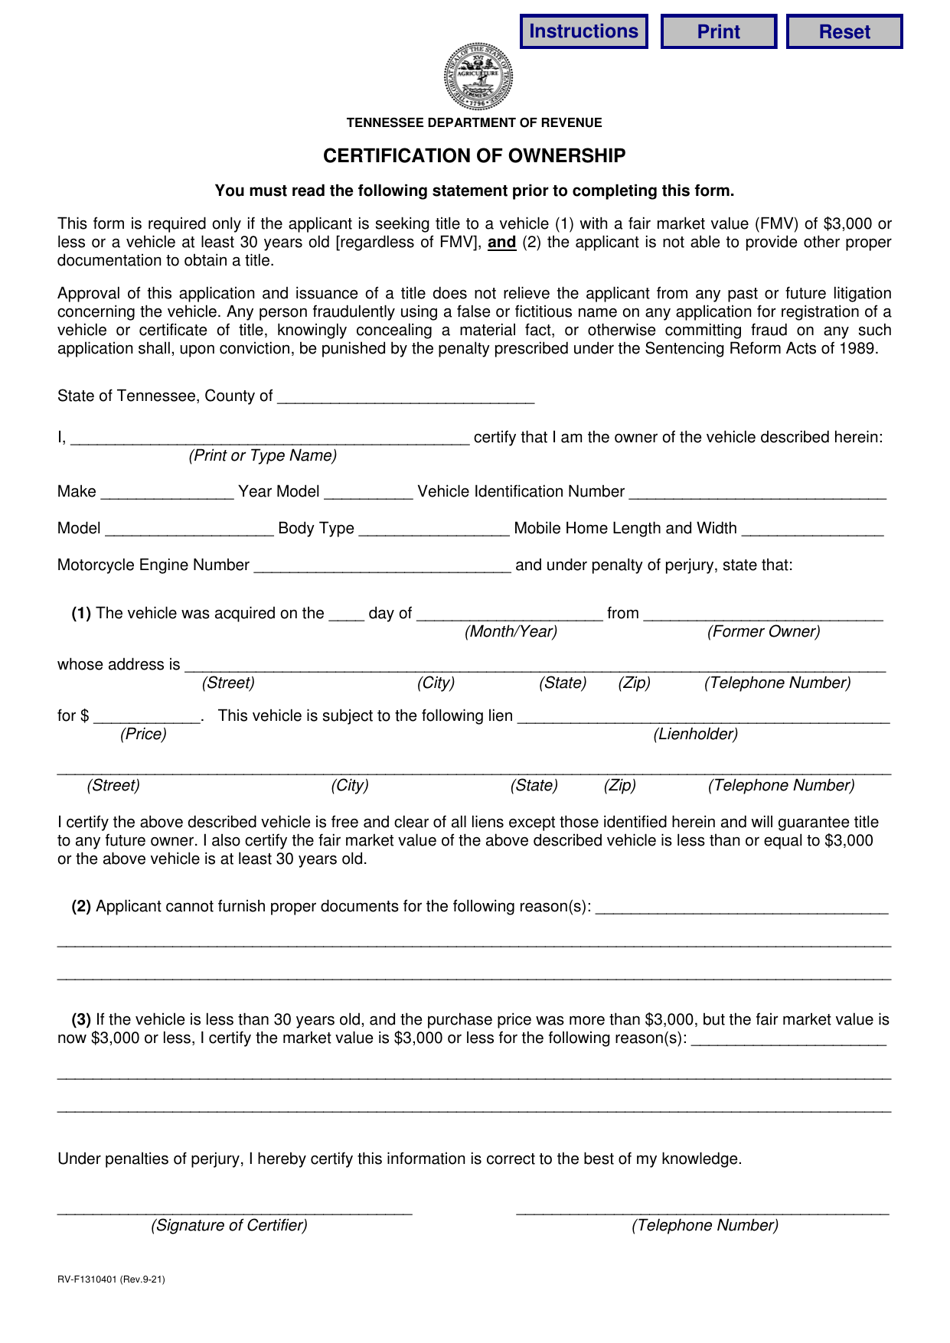 Form RV-F1310401 Certification of Ownership - Tennessee, Page 1